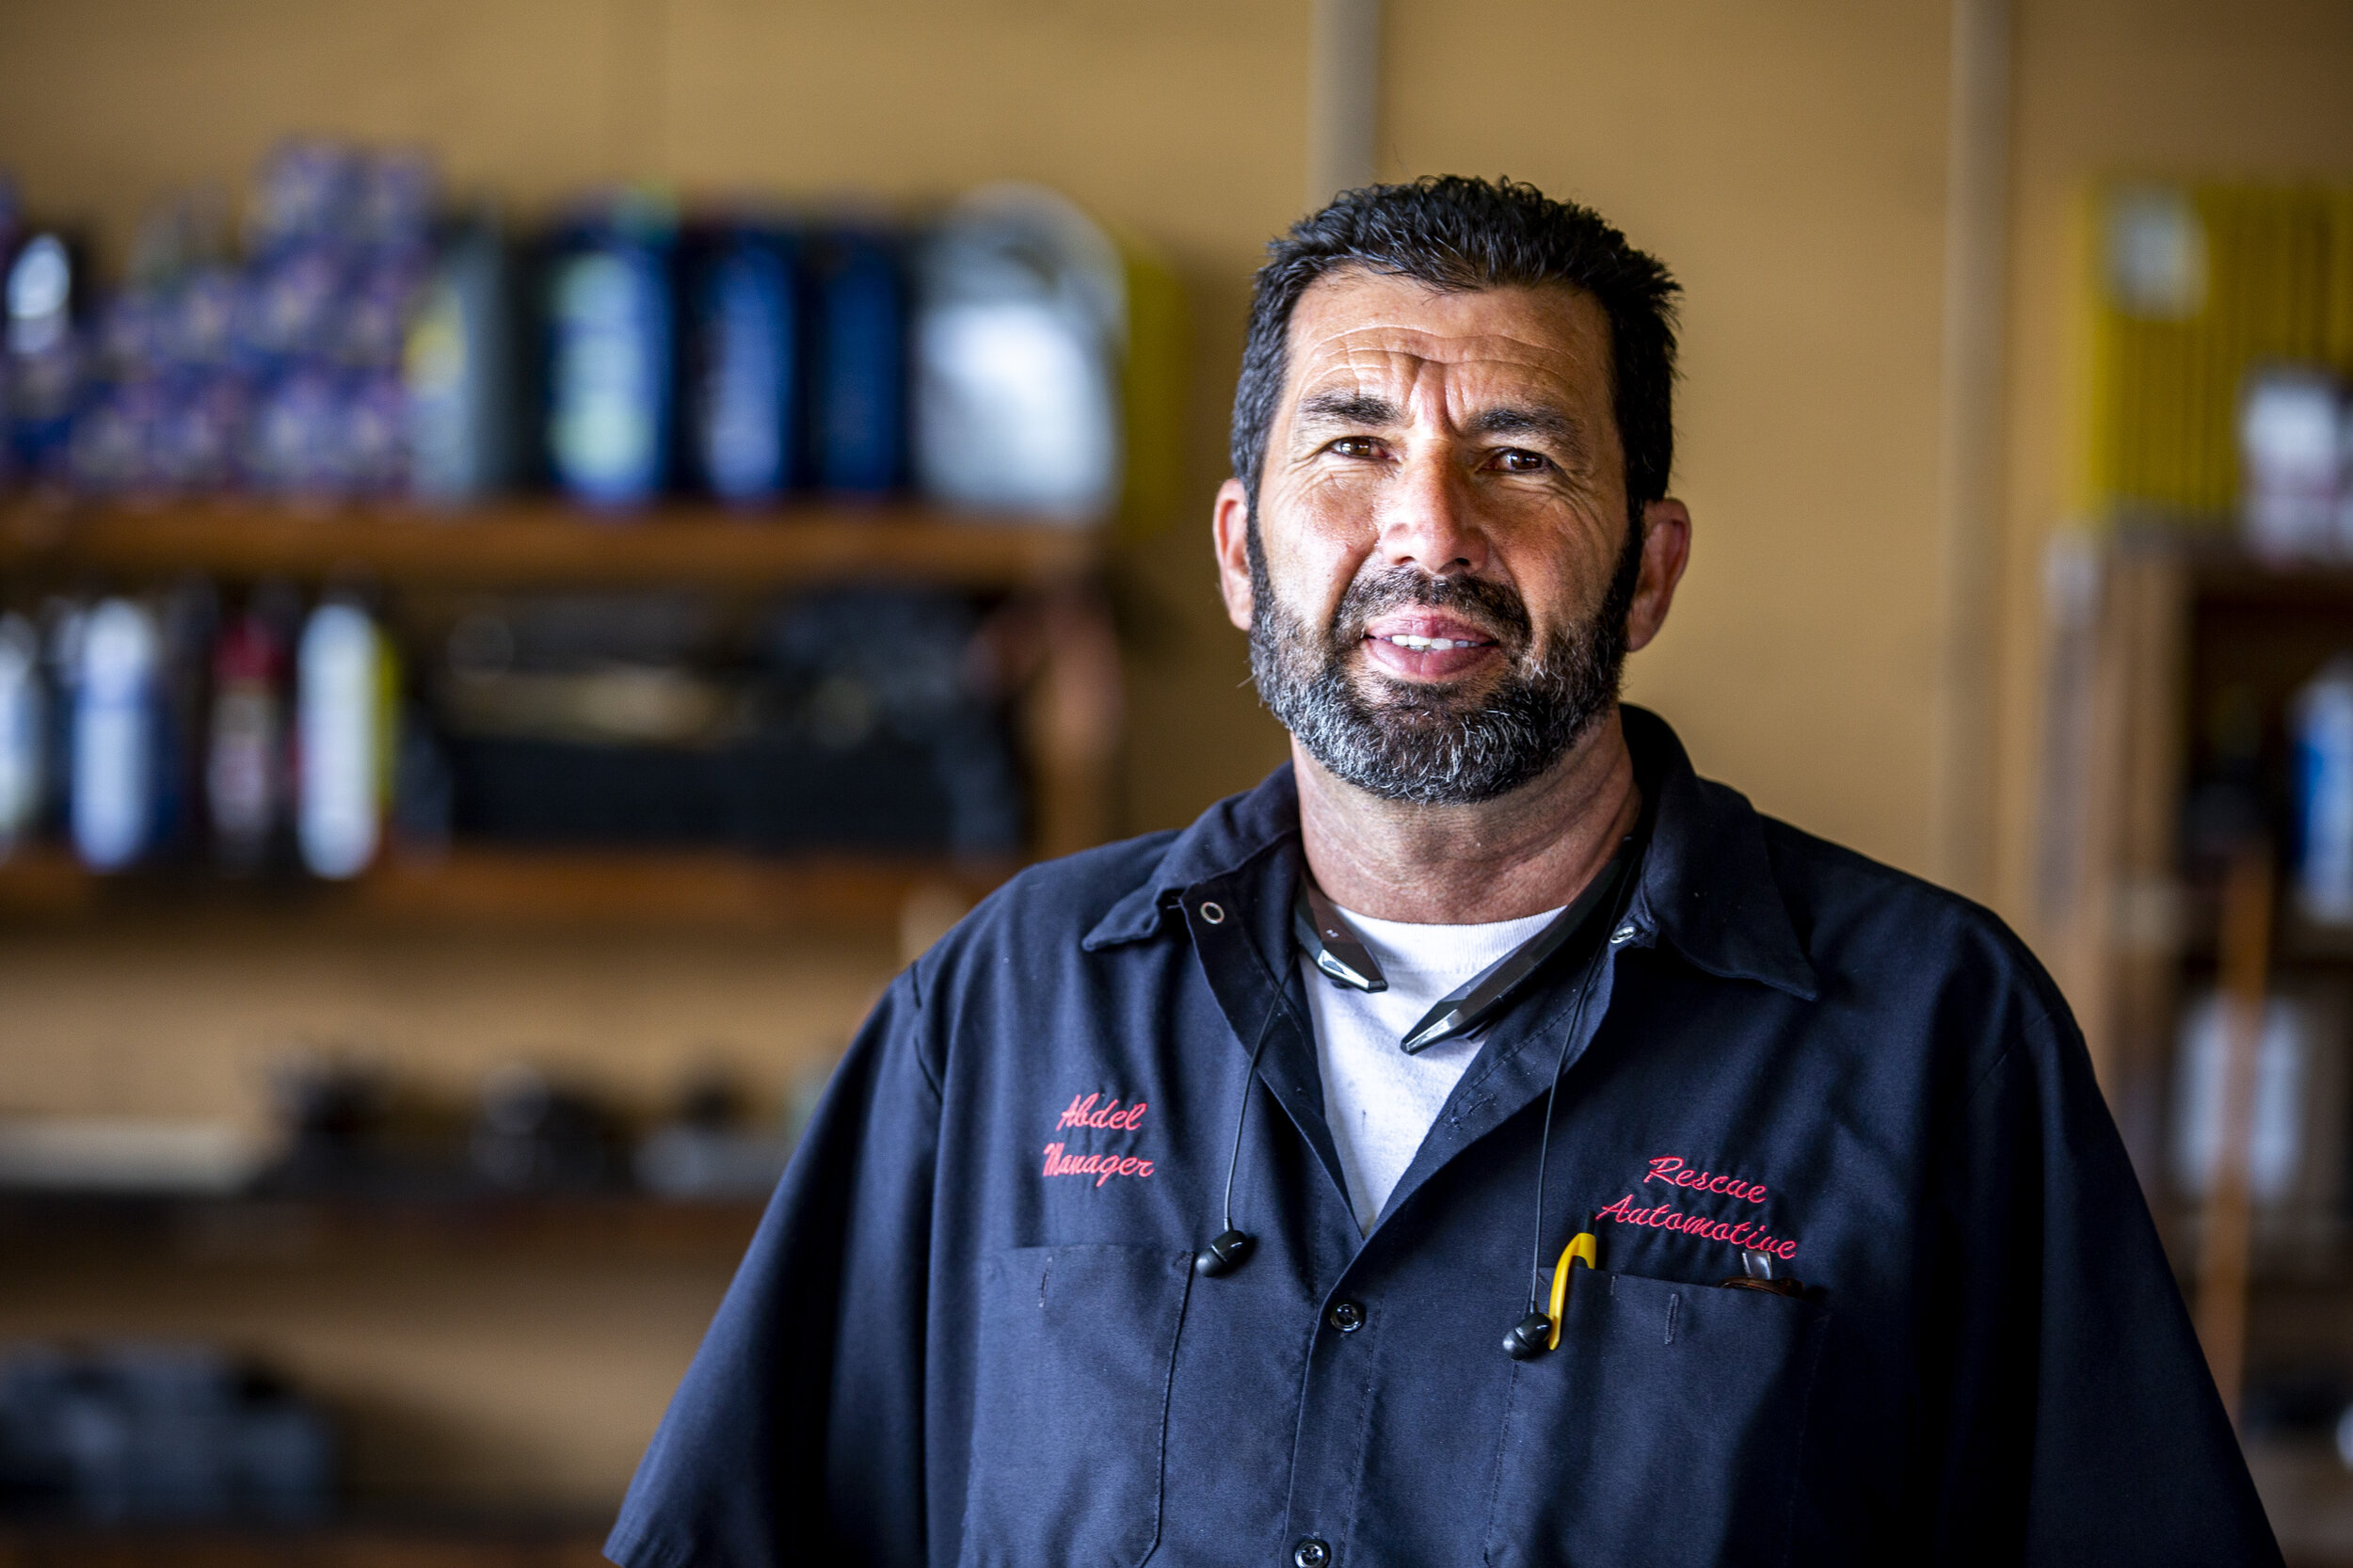  Abdel Shelleh, manager at Rescue Automotive, said, "If you really need to get somewhere like a doctor's office or emergency visit, from A to B, you need your car. If your car isn't working, technically there's no other transportation around out here